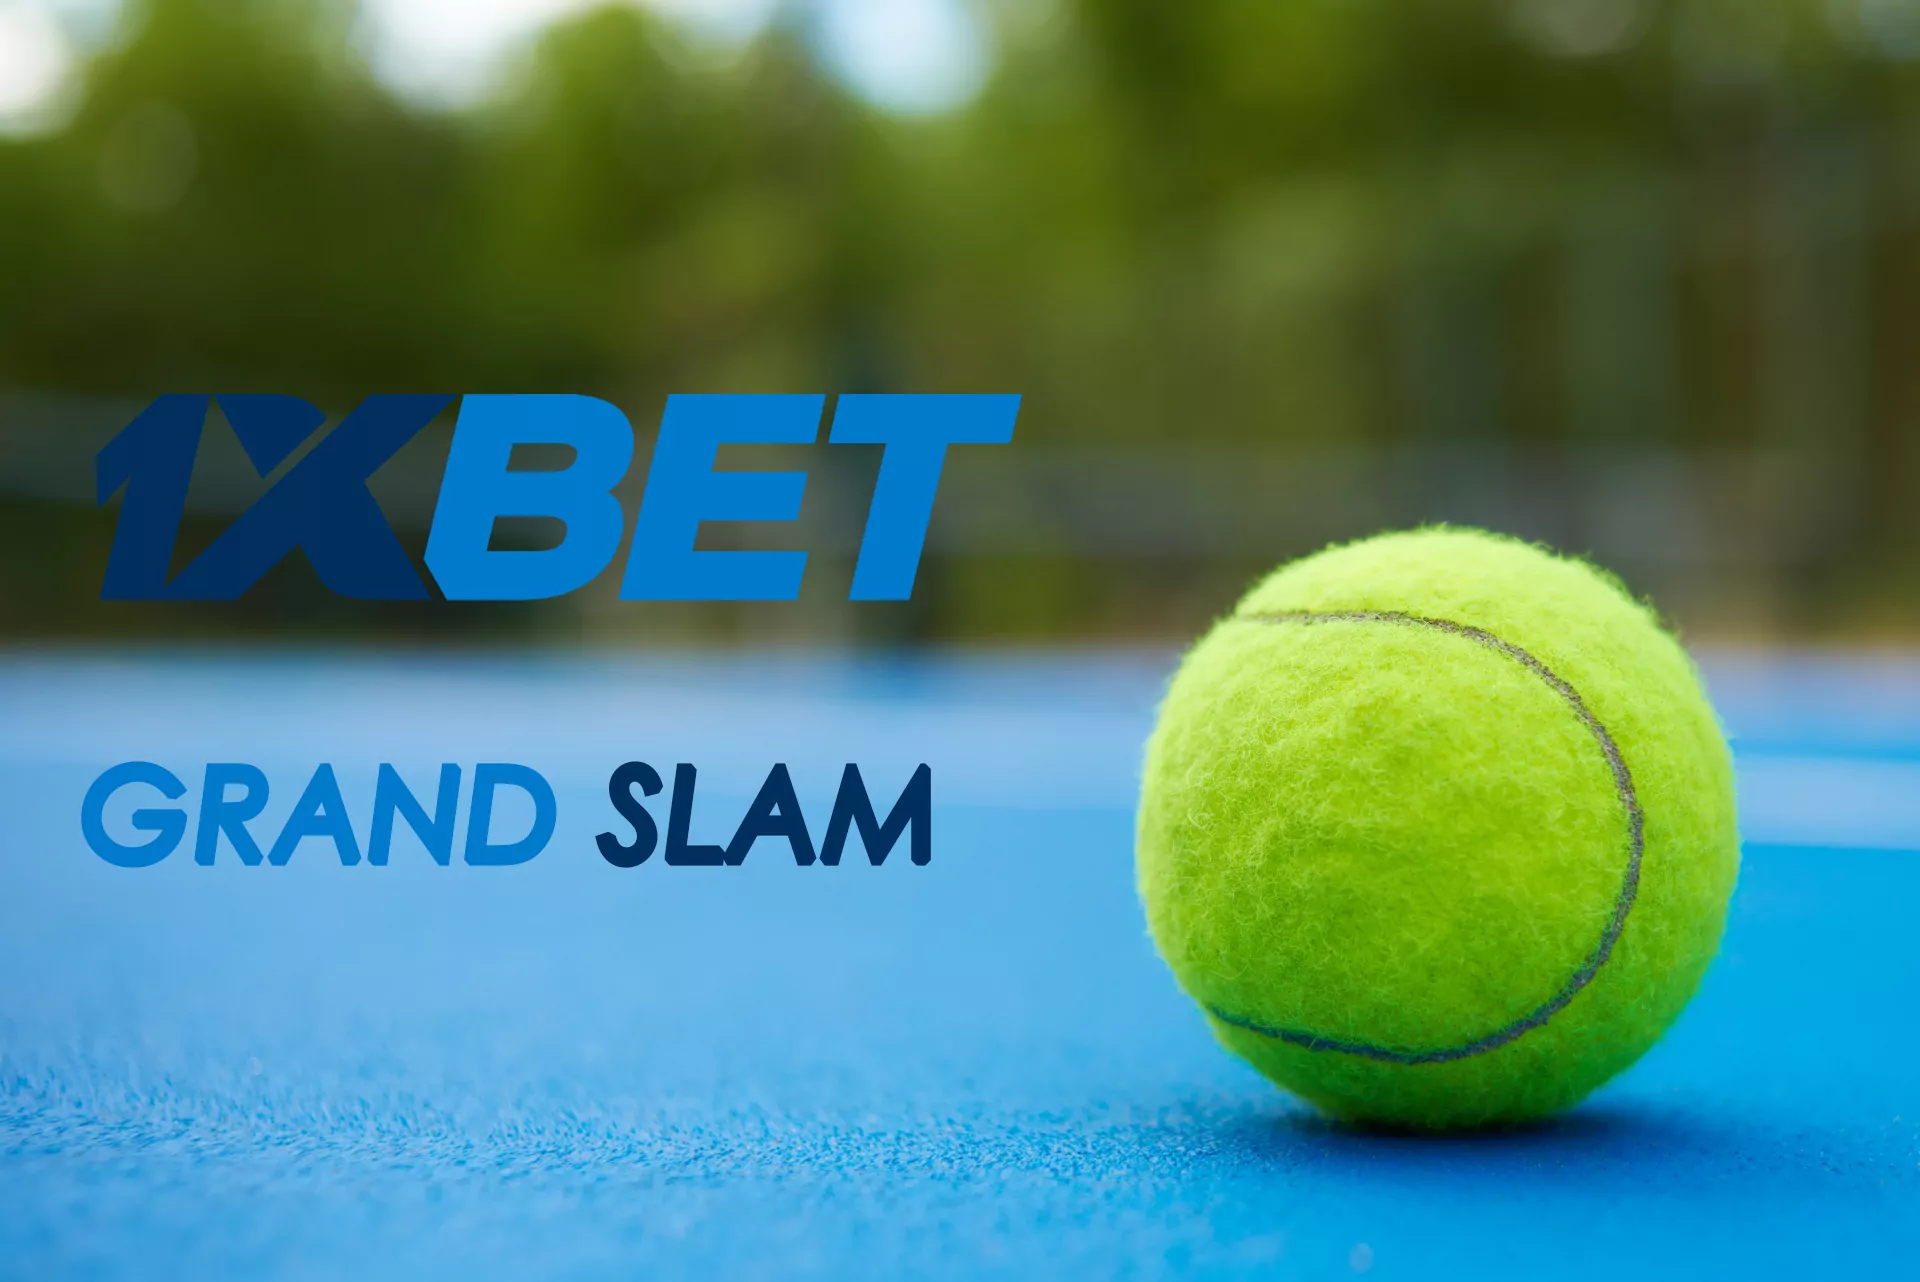 During the Grand Slam tournaments 1xBet offers special bonuses for betting on tennis.